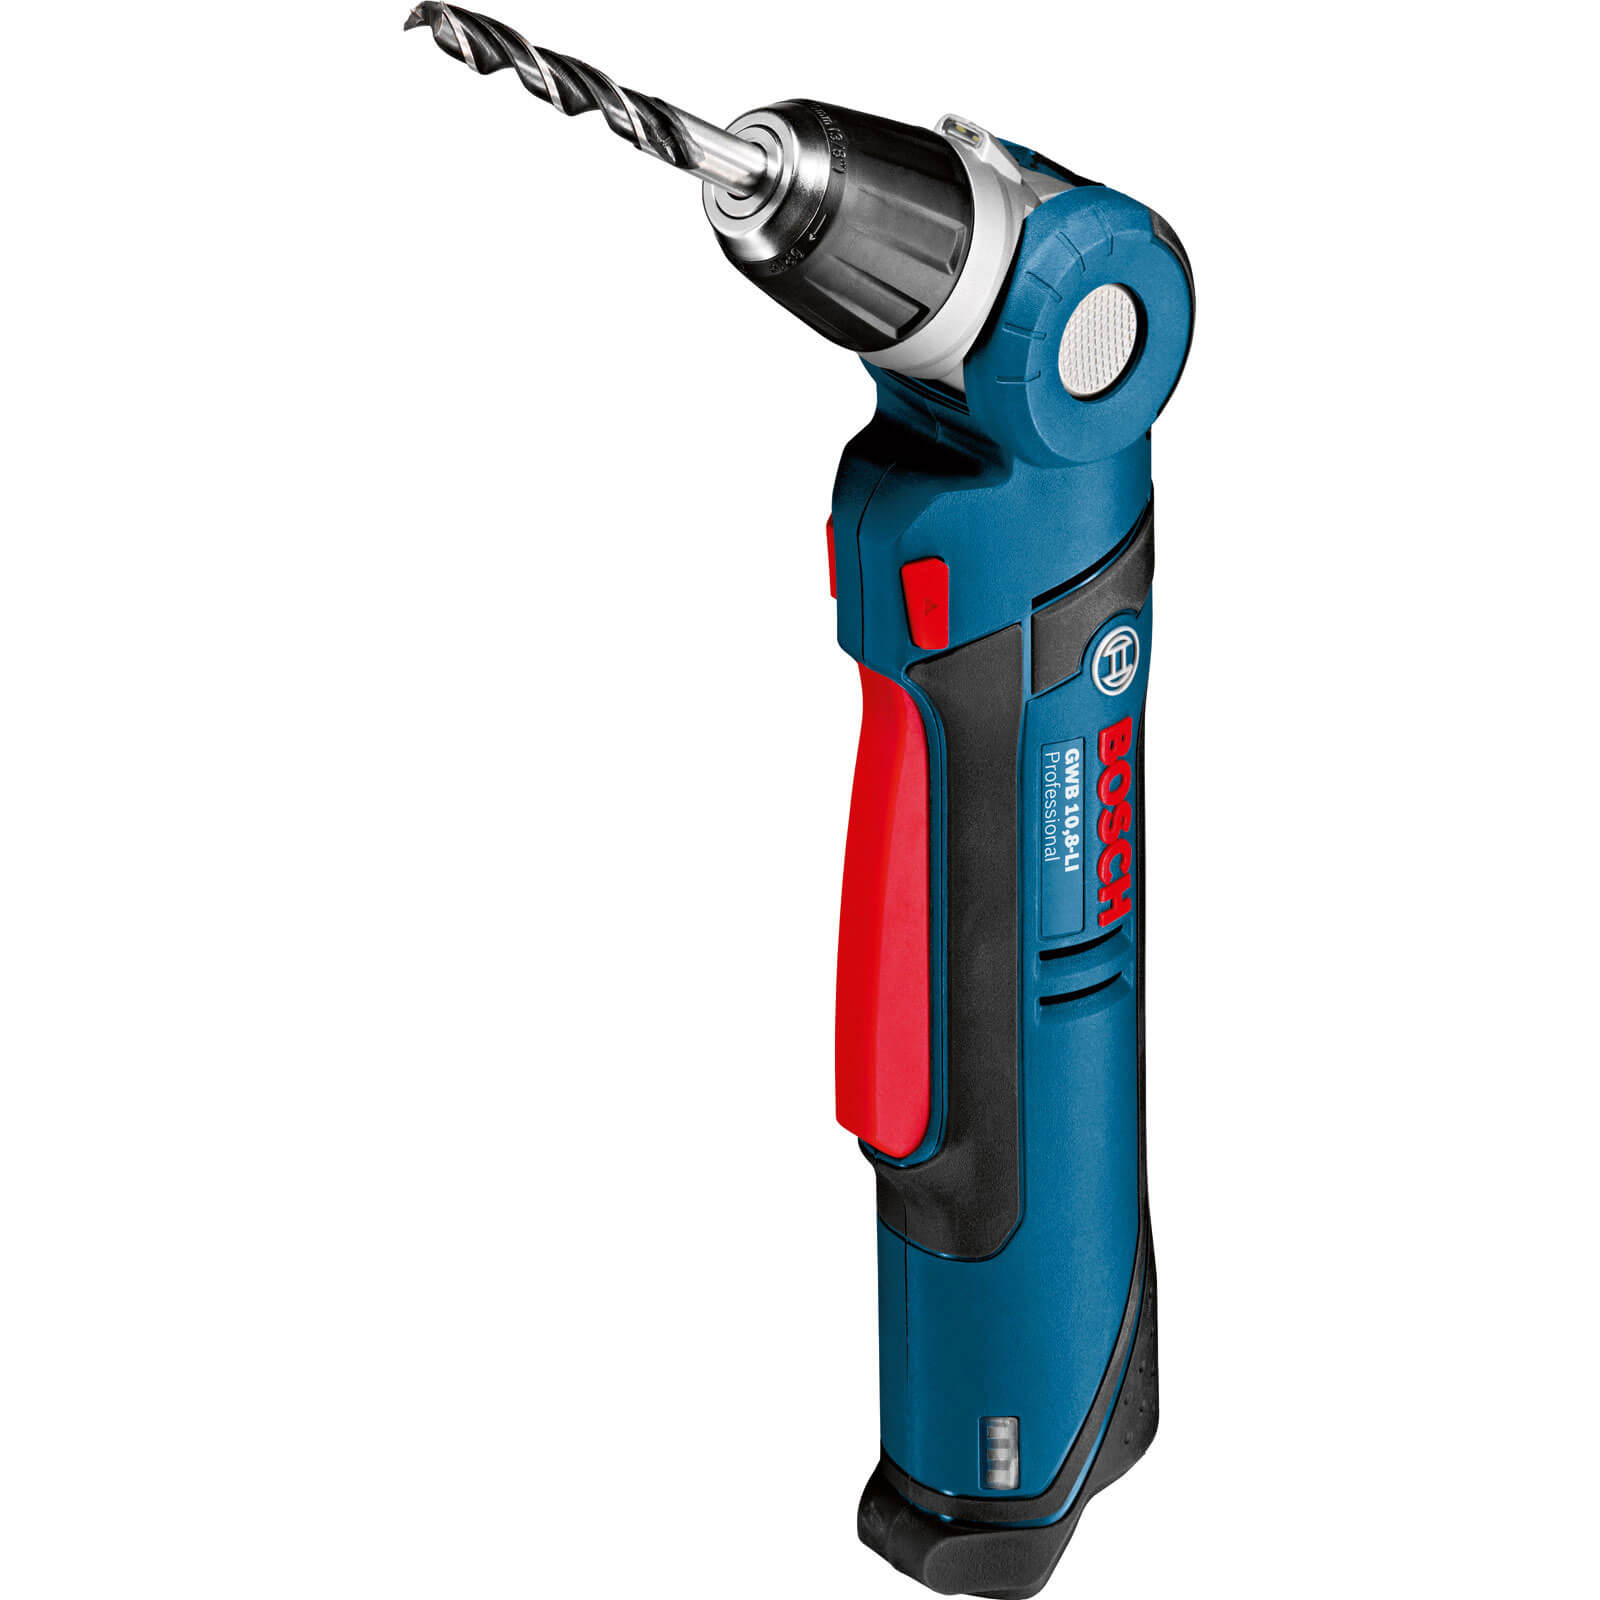 Bosch GWB 10.8V-Li 10.8v Cordless Angle Drill without Battery or Charger